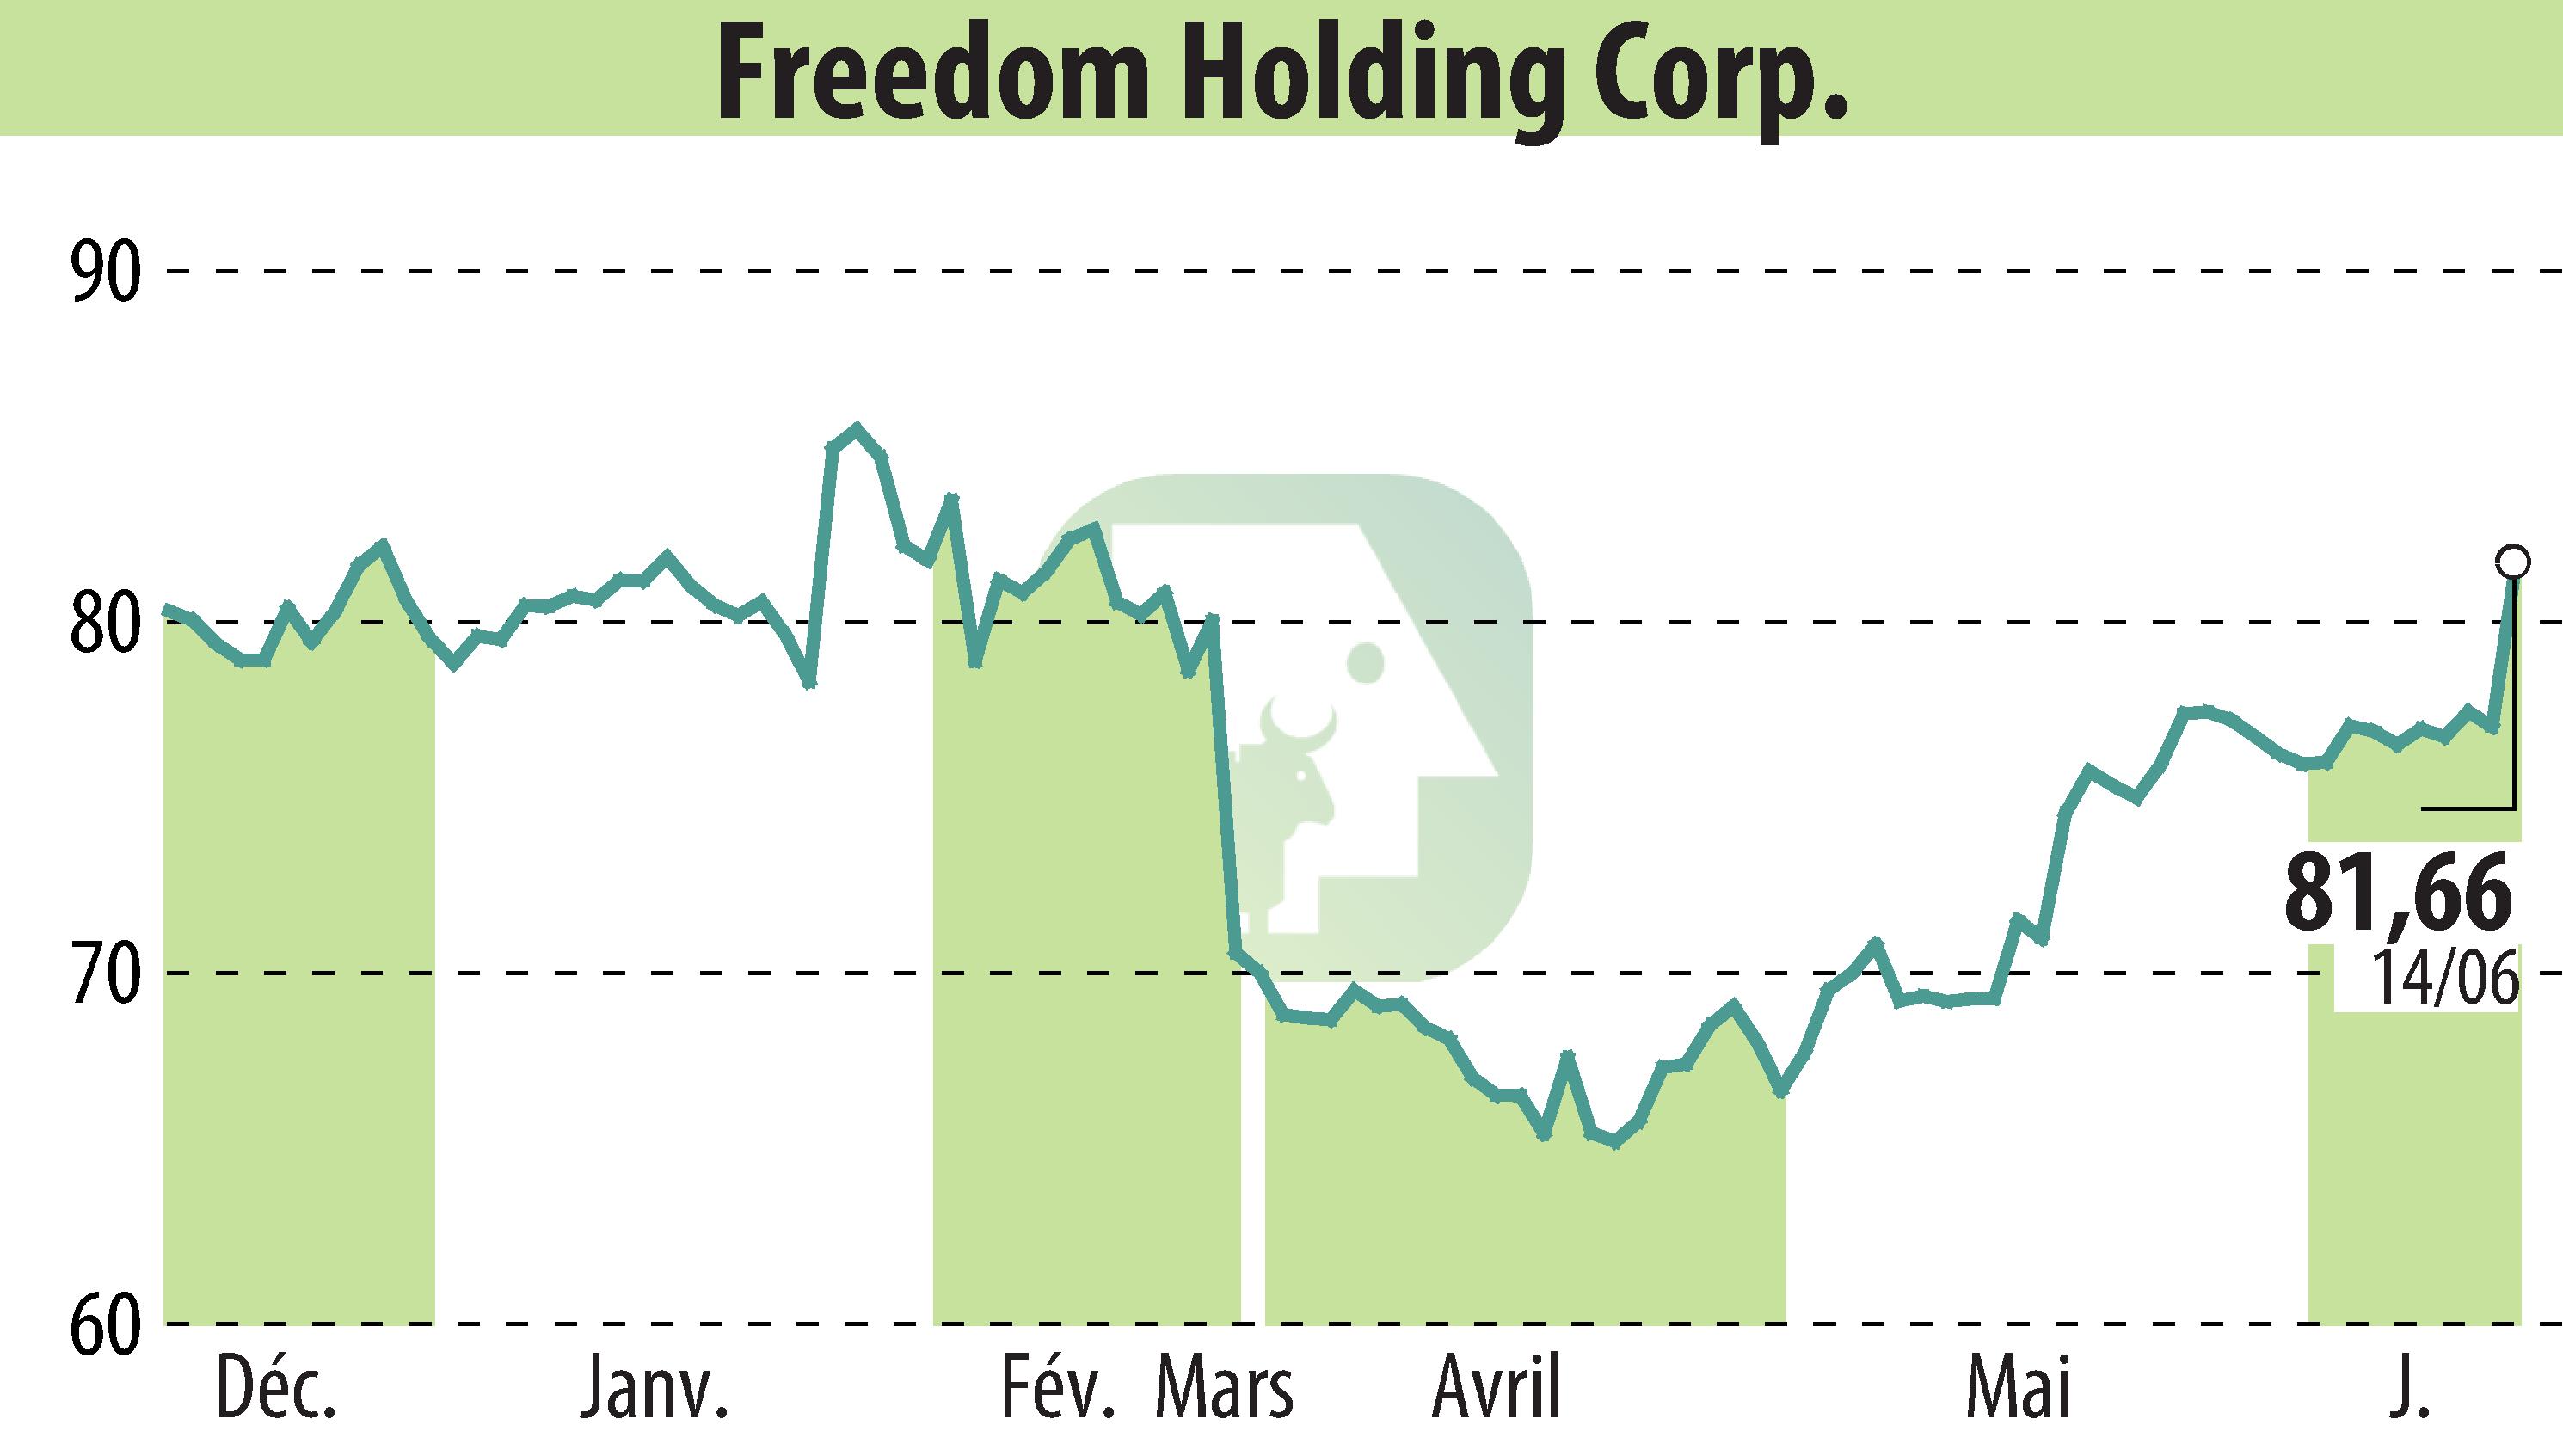 Stock price chart of Freedom Holding Corp. (EBR:FRHC) showing fluctuations.